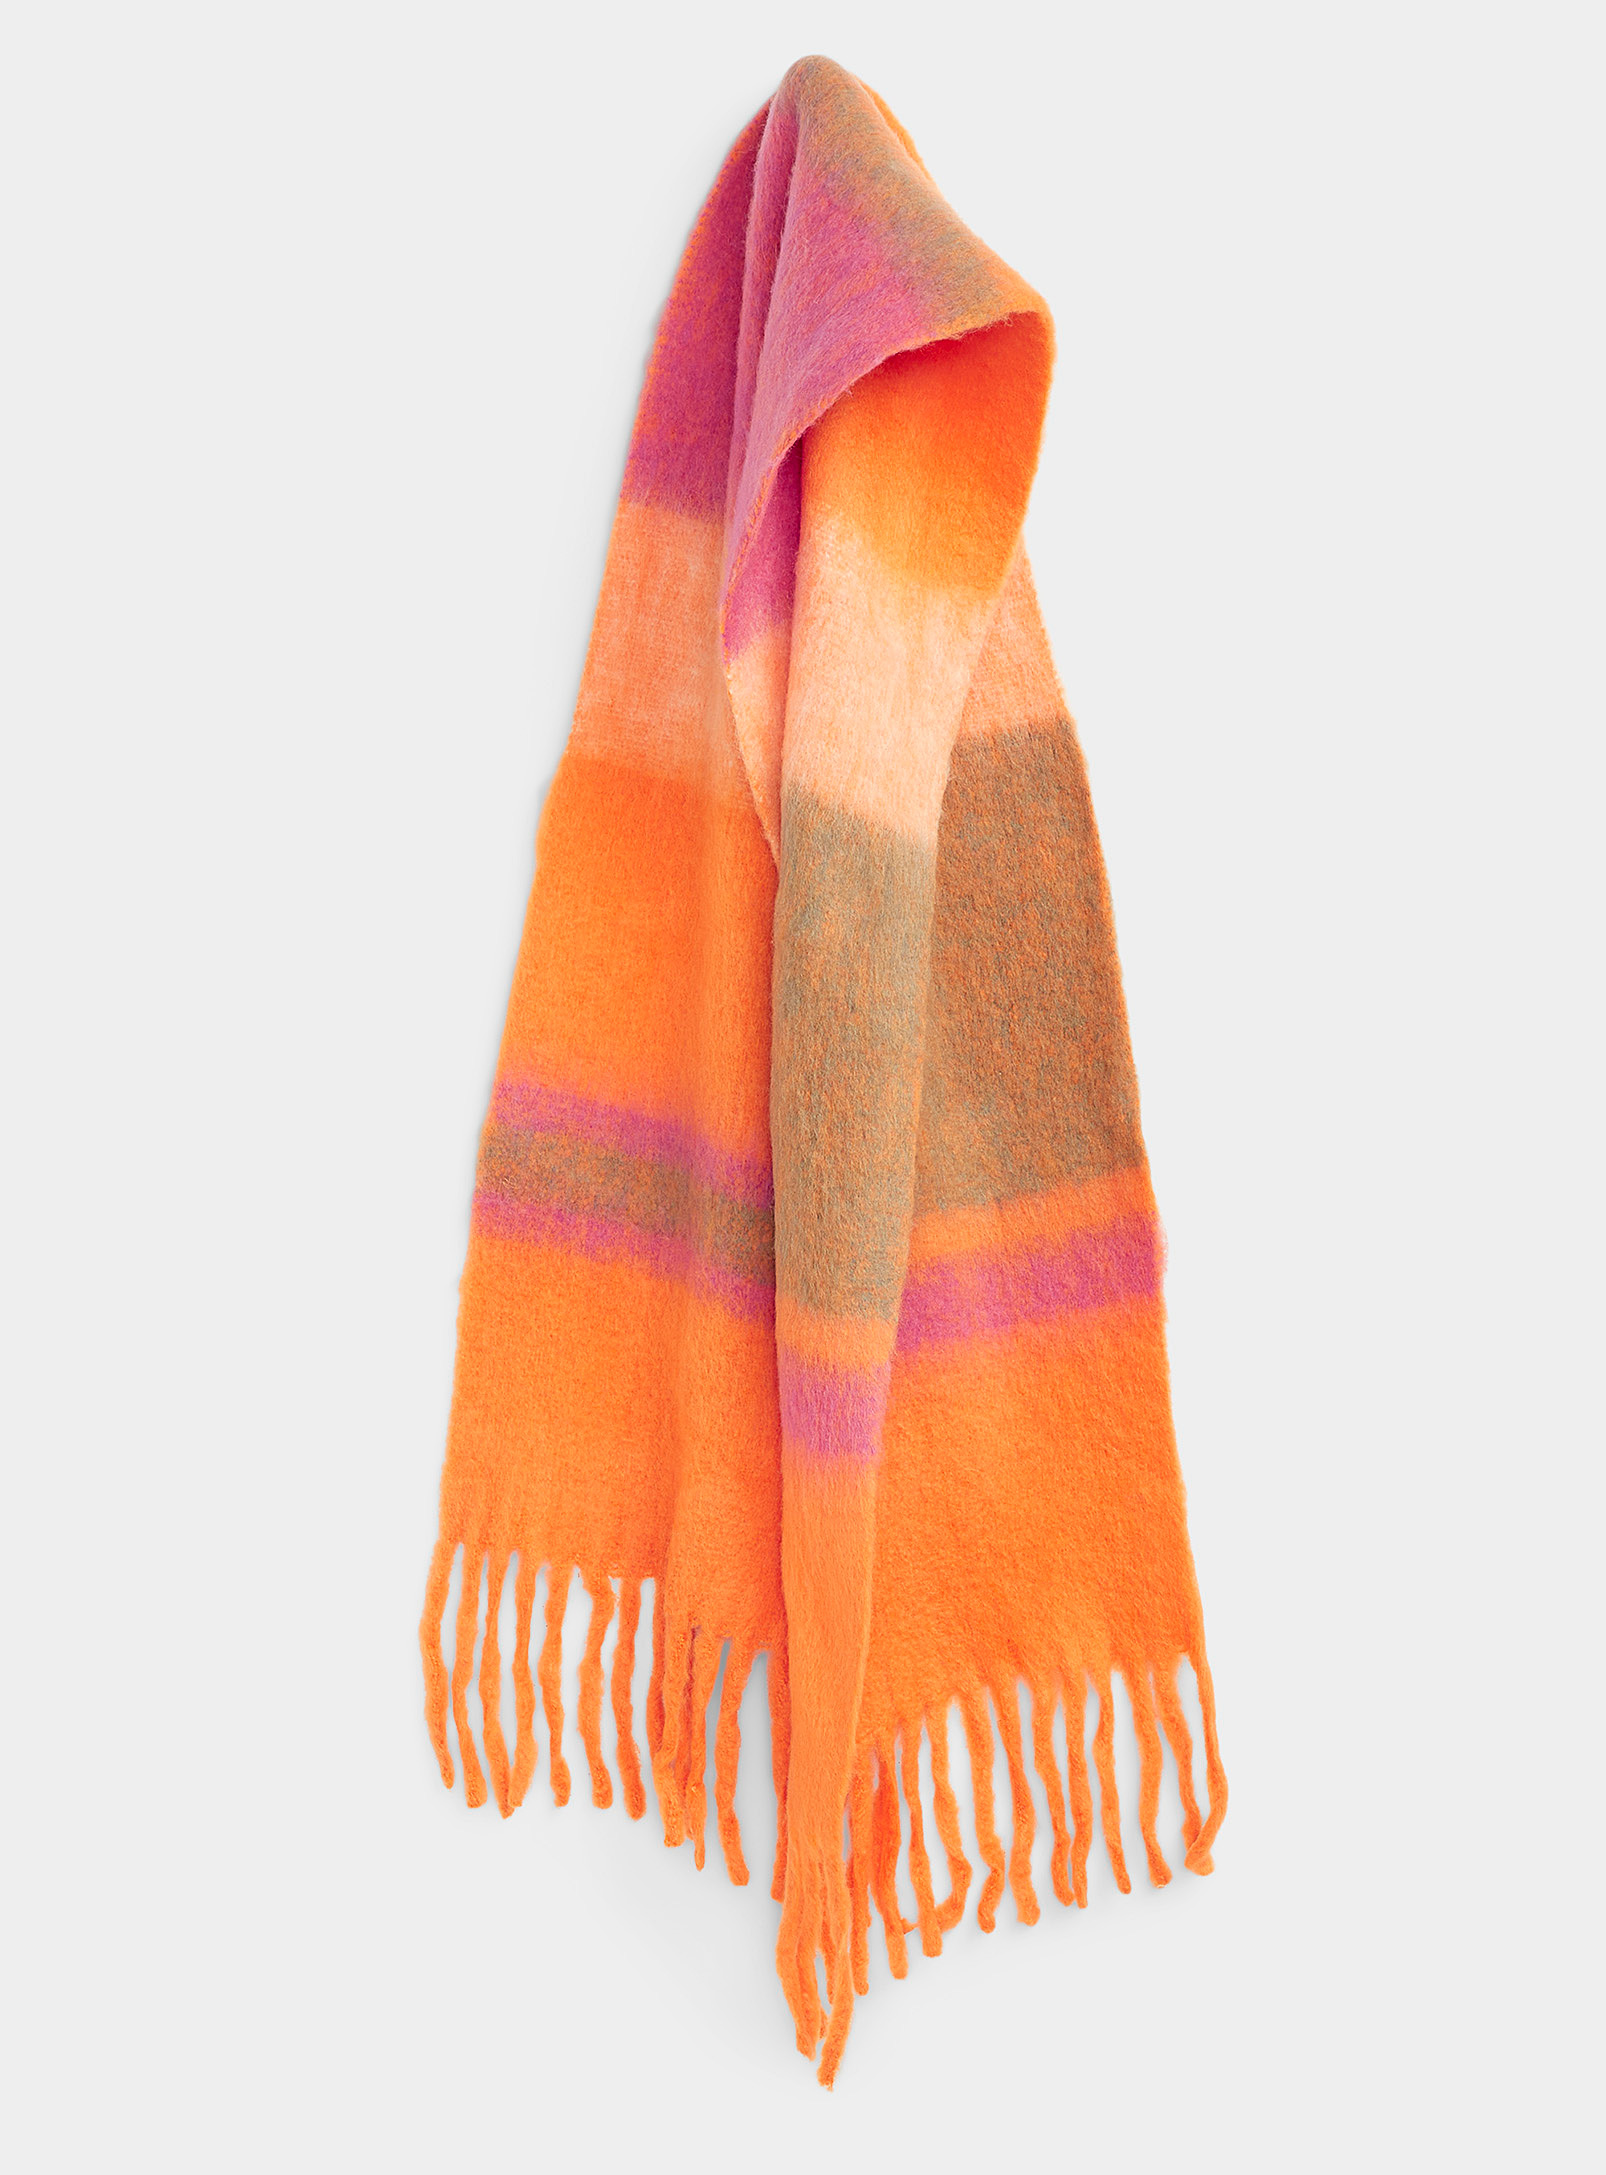 Moment by moment - Women's Graded orange-pink scarf